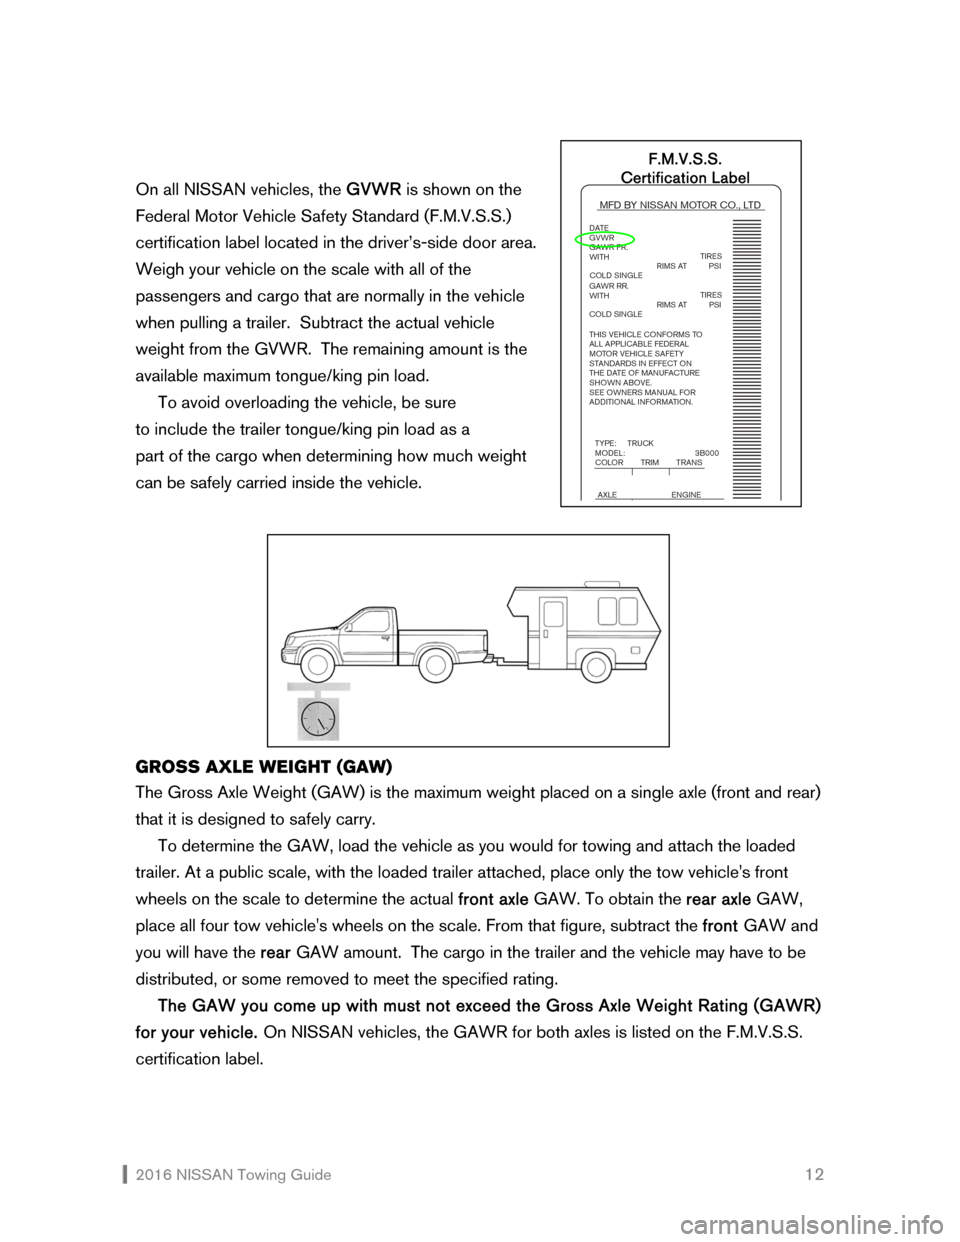 NISSAN ROGUE 2016 2.G Towing Guide  2016 NISSAN Towing Guide    12  
On all NISSAN vehicles, the GVWR is shown on the  
Federal Motor Vehicle Safety Standard (F.M.V.S.S.) 
certification label located in the driver’s-side door area.  